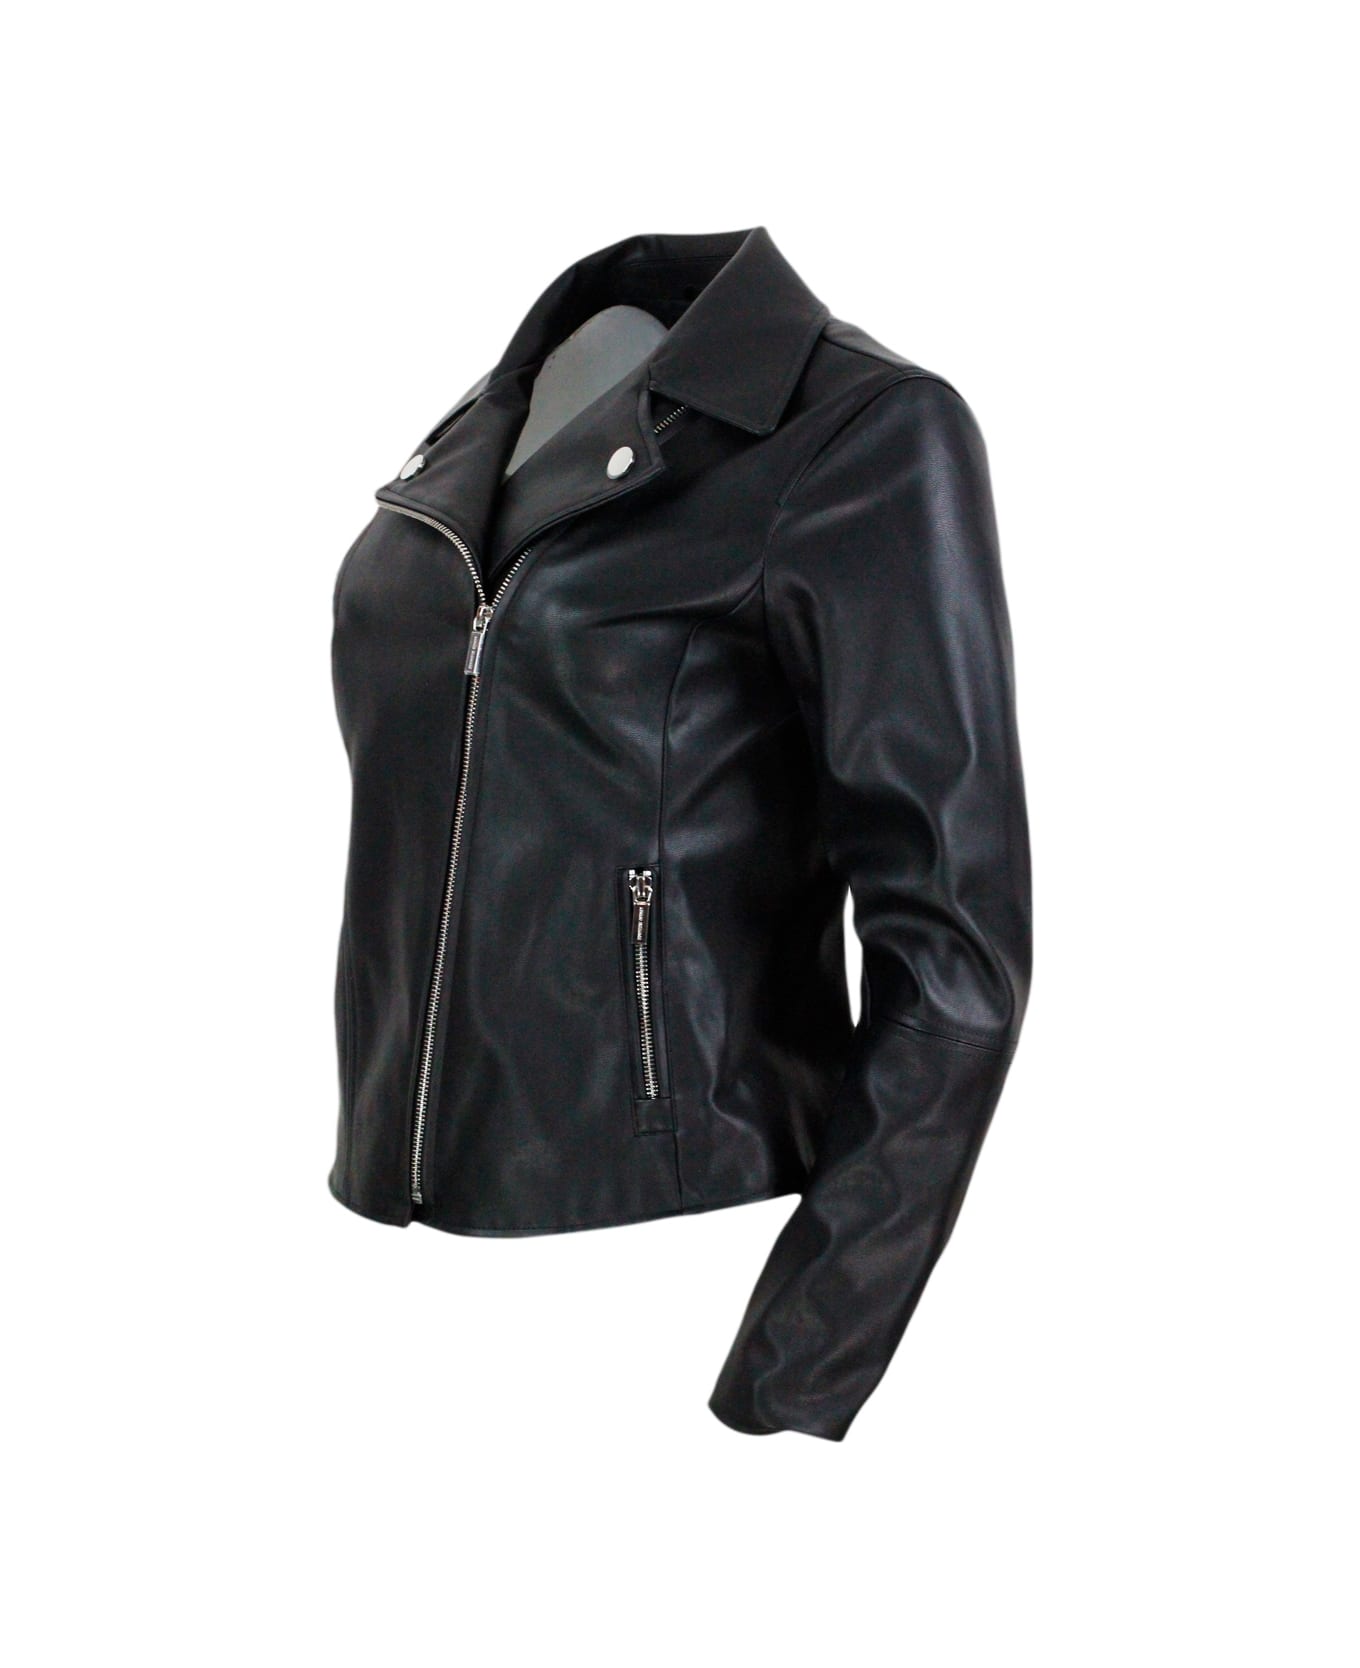 Armani Collezioni Studded Jacket Made Of Eco-leather With Zip Closure And Zips On The Cuffs And Pockets - Black